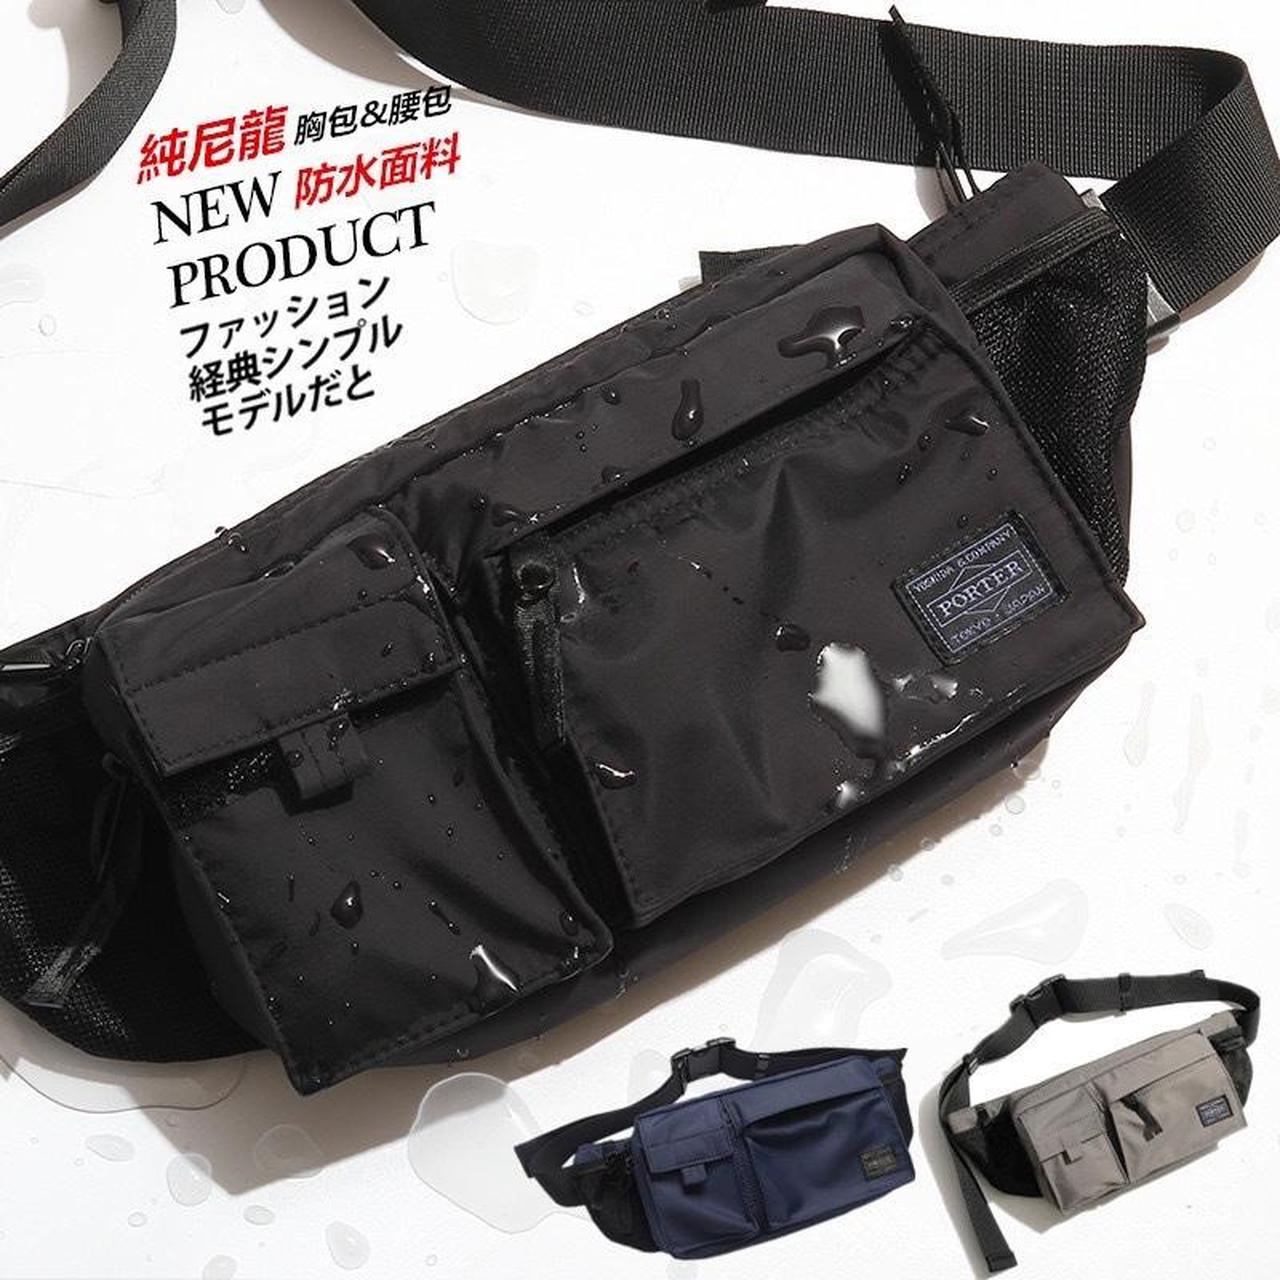 Product Image 1 - Used Porter bag. Can be